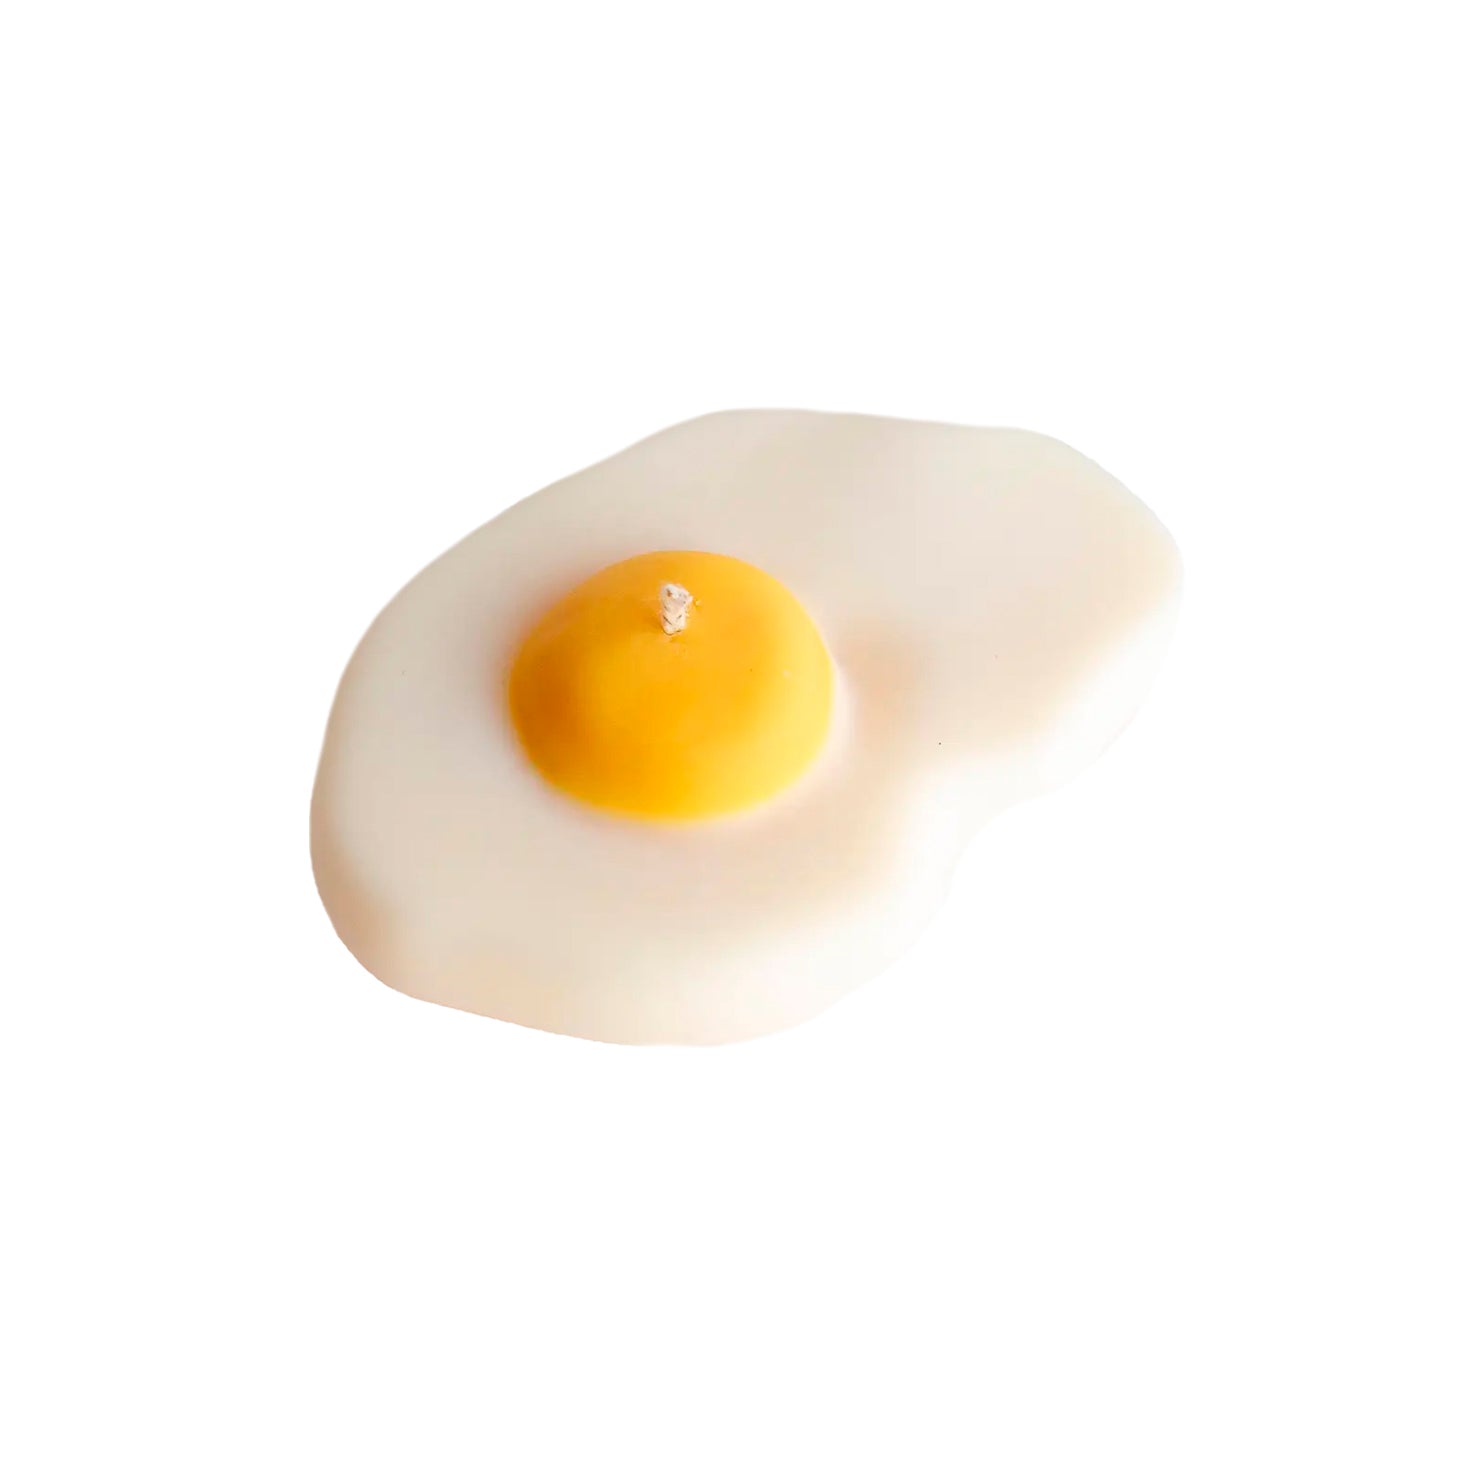 Egg on the plate candle